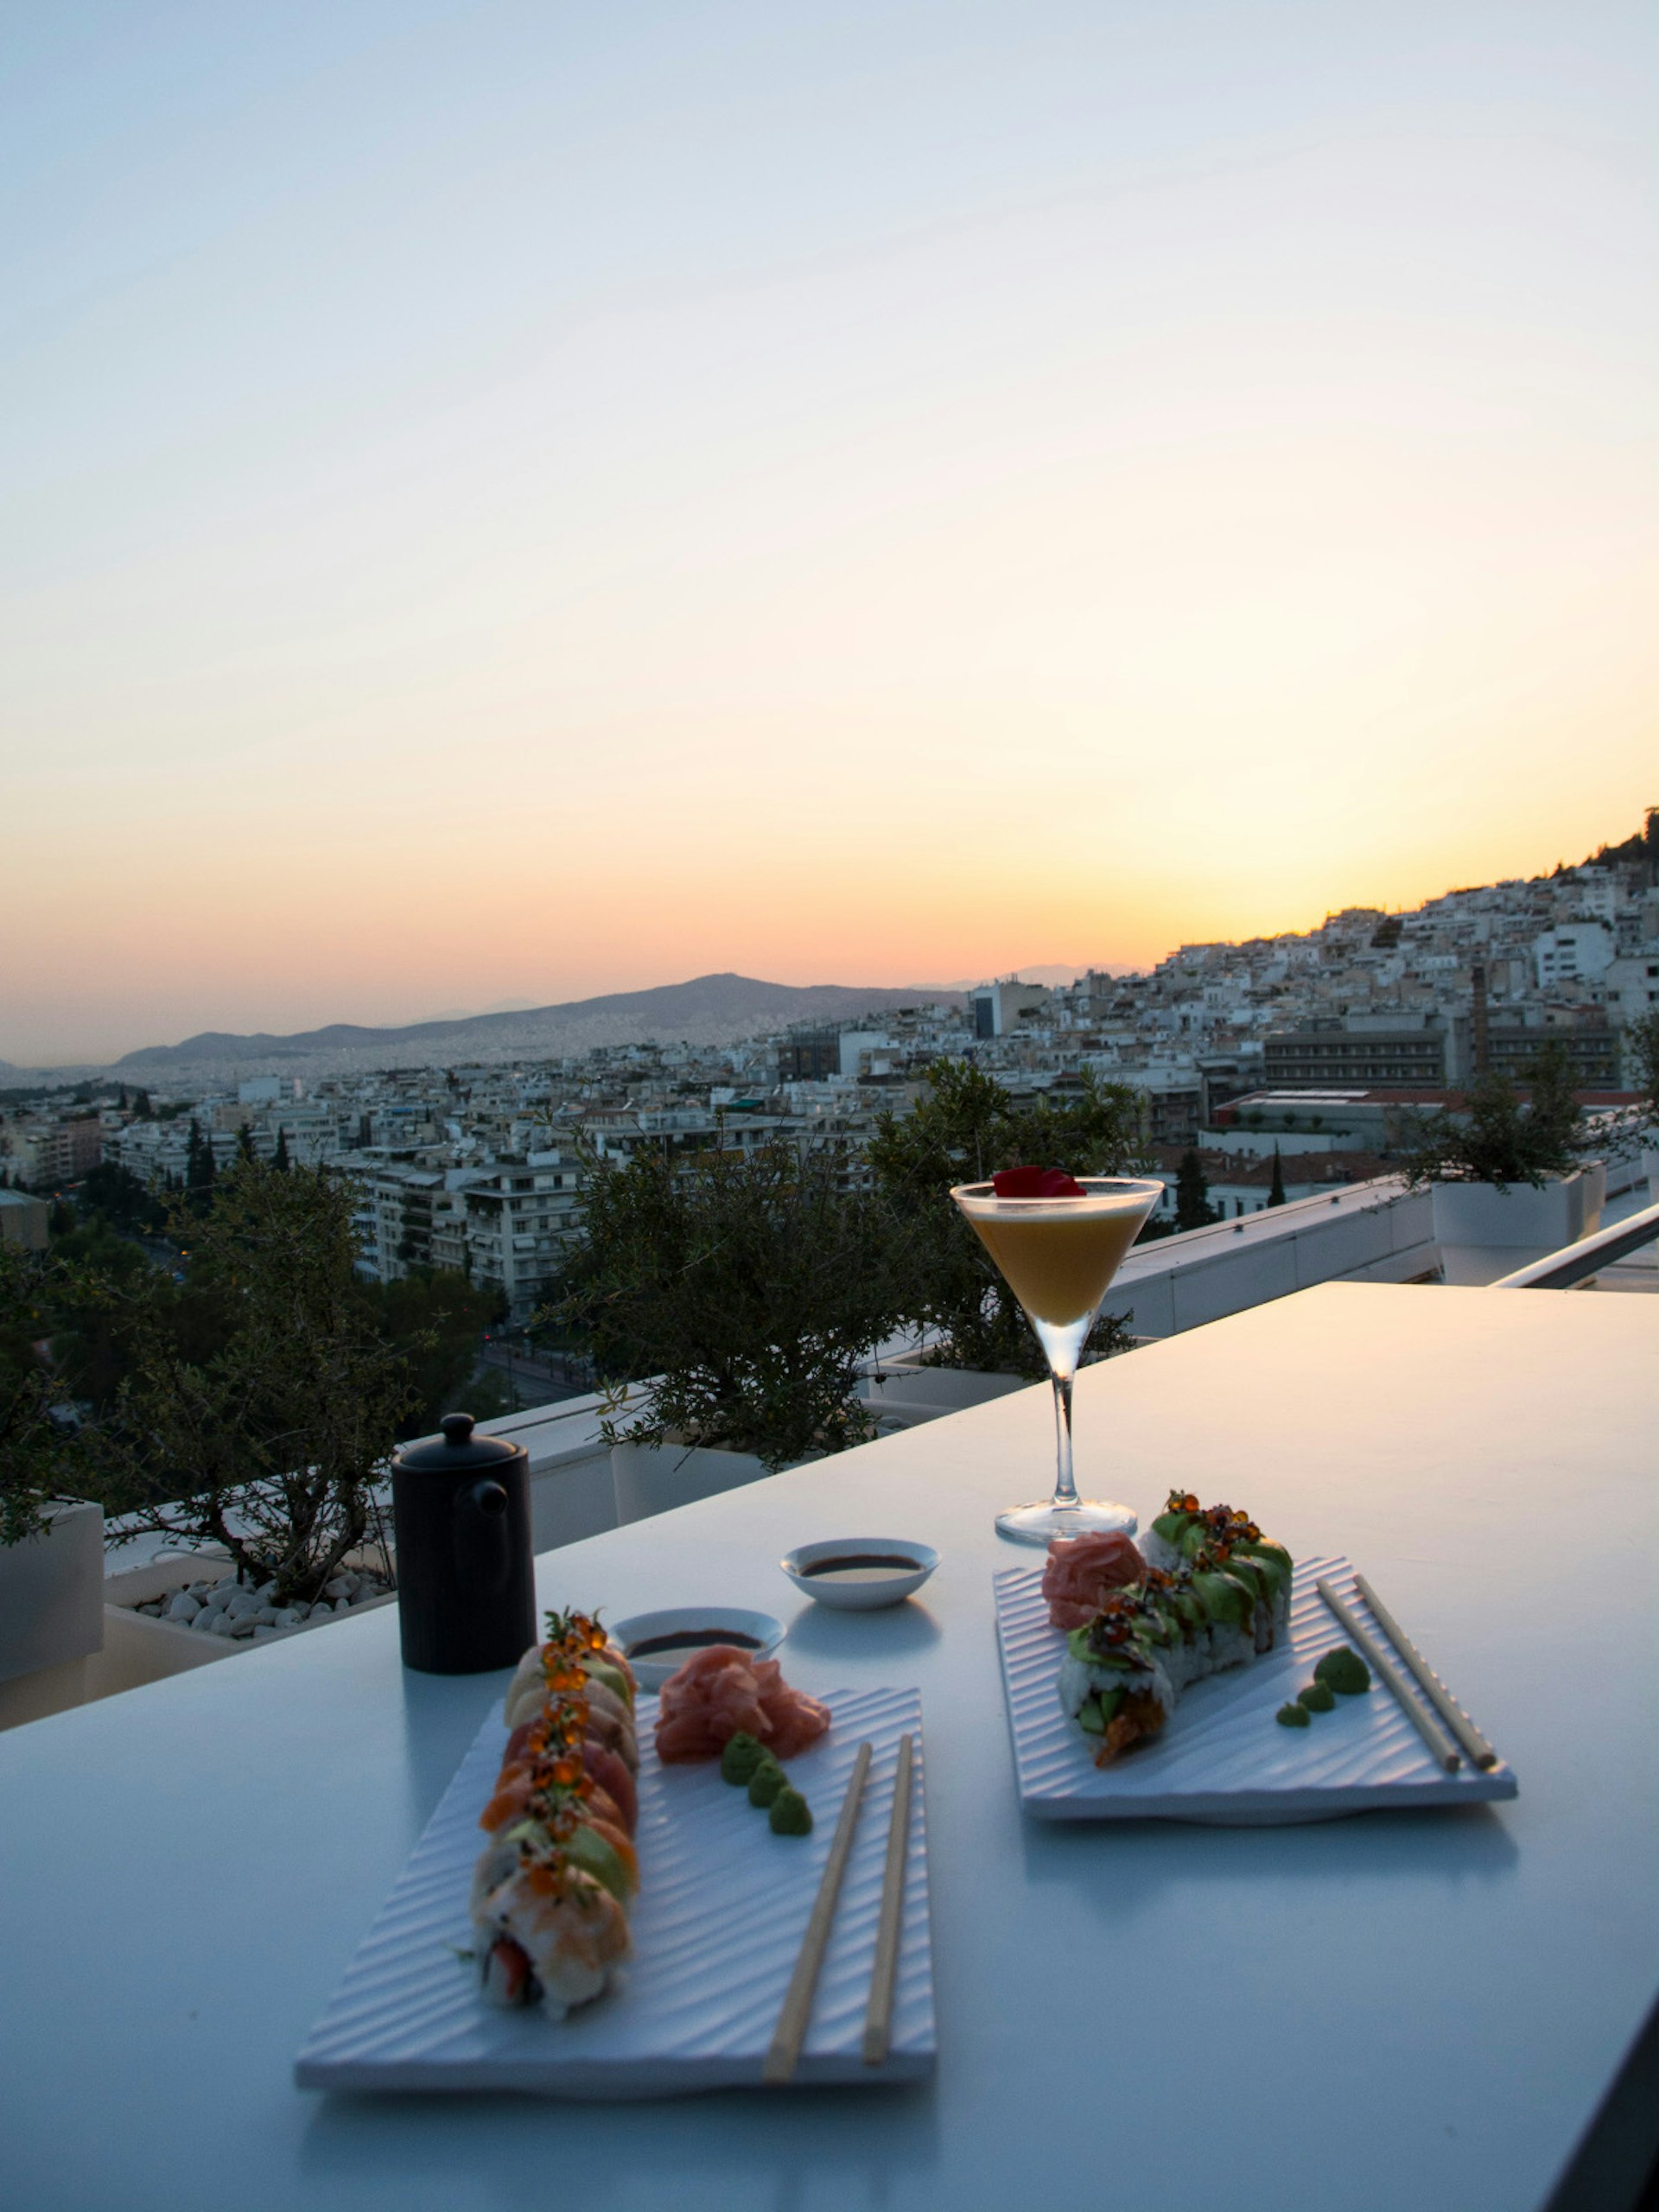 Soaking in the sunset panorama of Athens from Galaxy Bar © Marissa Tejada / Lonely Planet